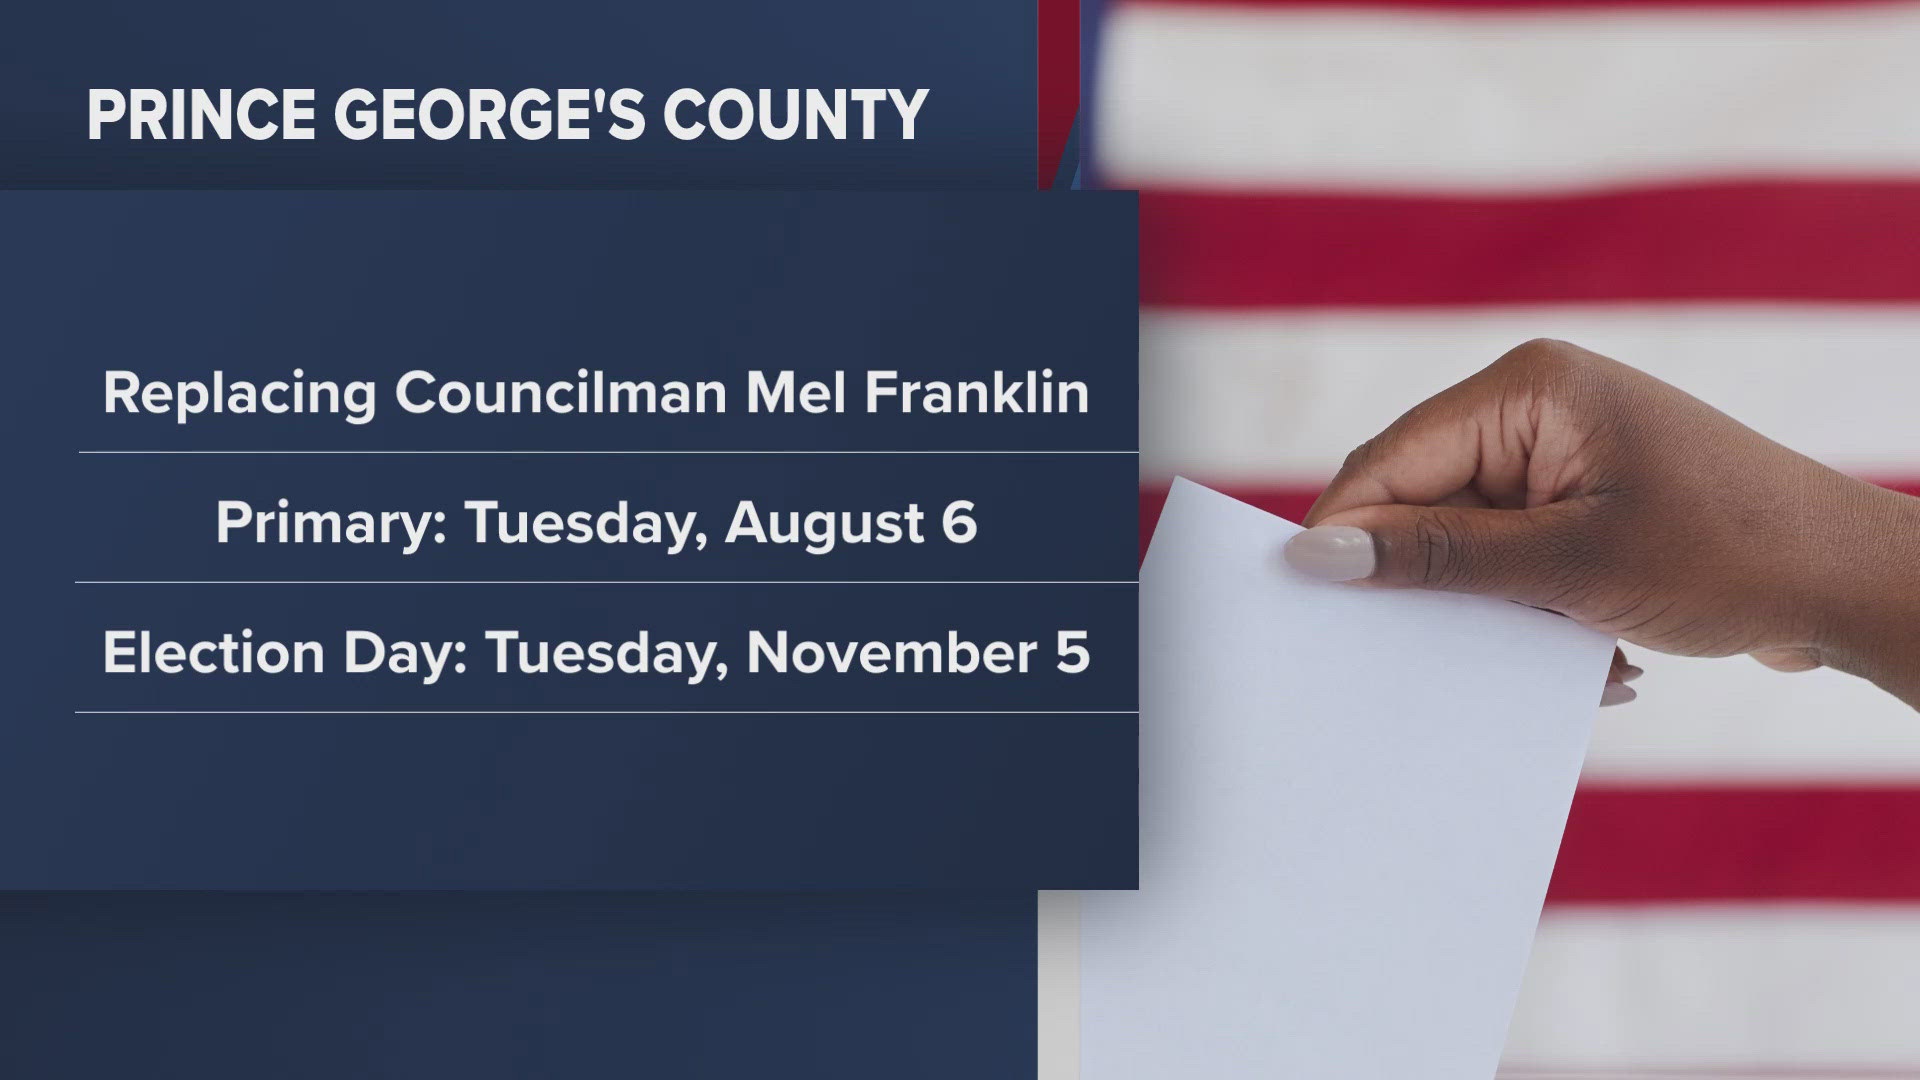 Prince George’s County Council has voted to hold a special election to fill Mel Franklin’s now vacant seat.